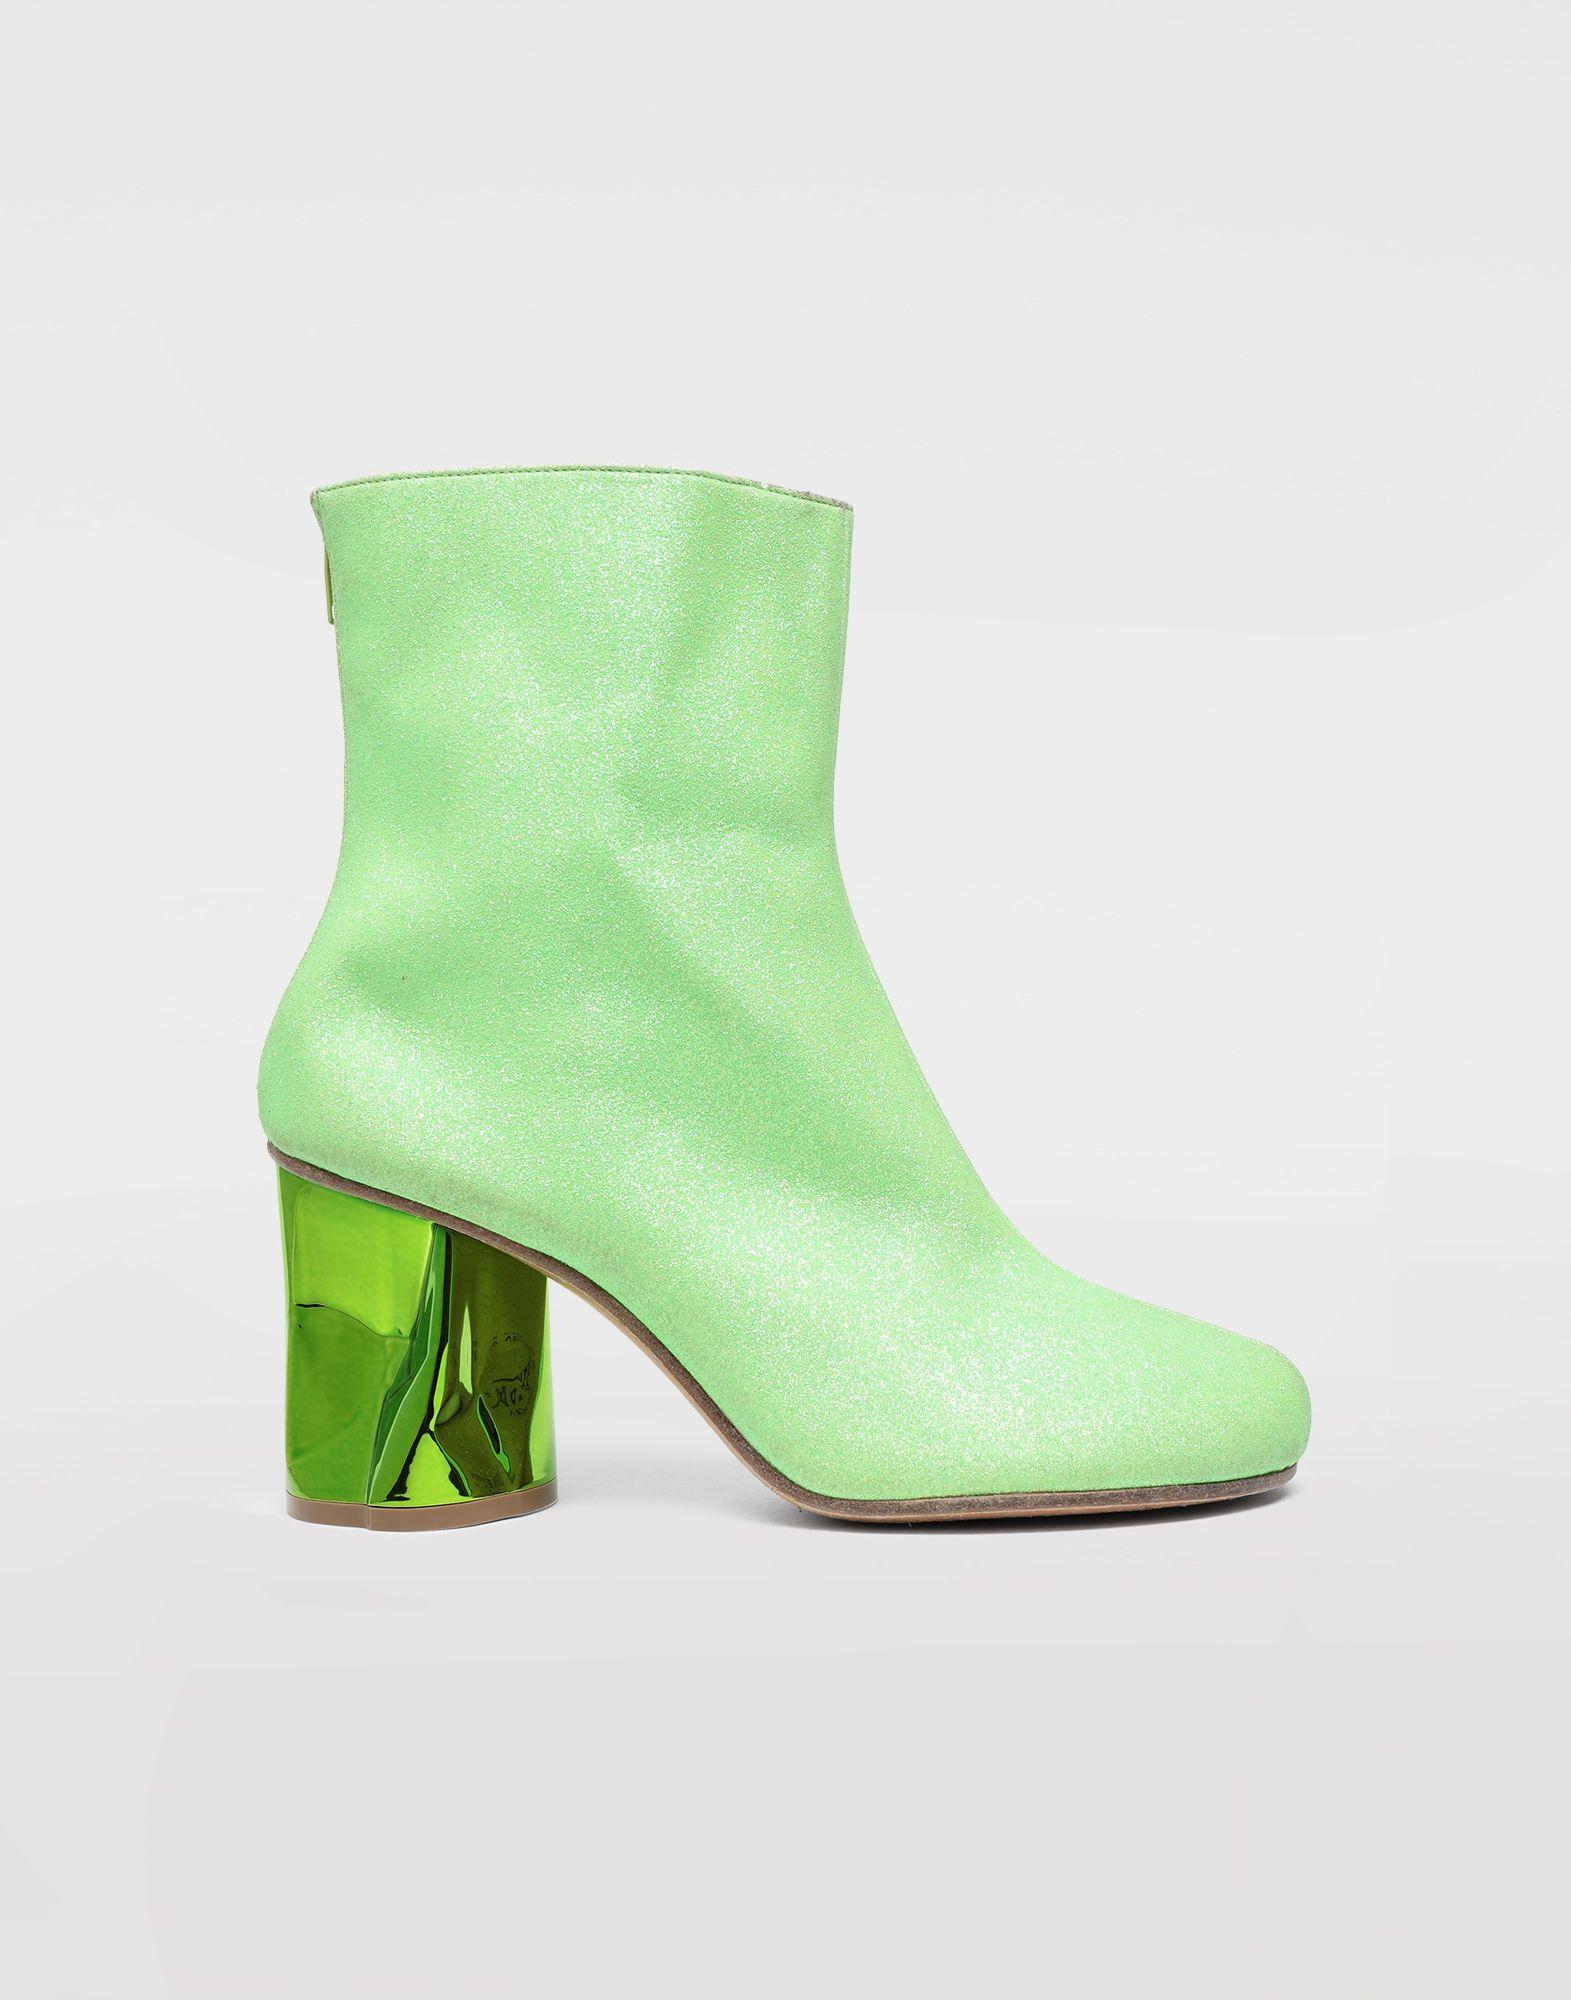 Maison Margiela Leather Glitter Crushed Heel Ankle Boots in Acid Green ...